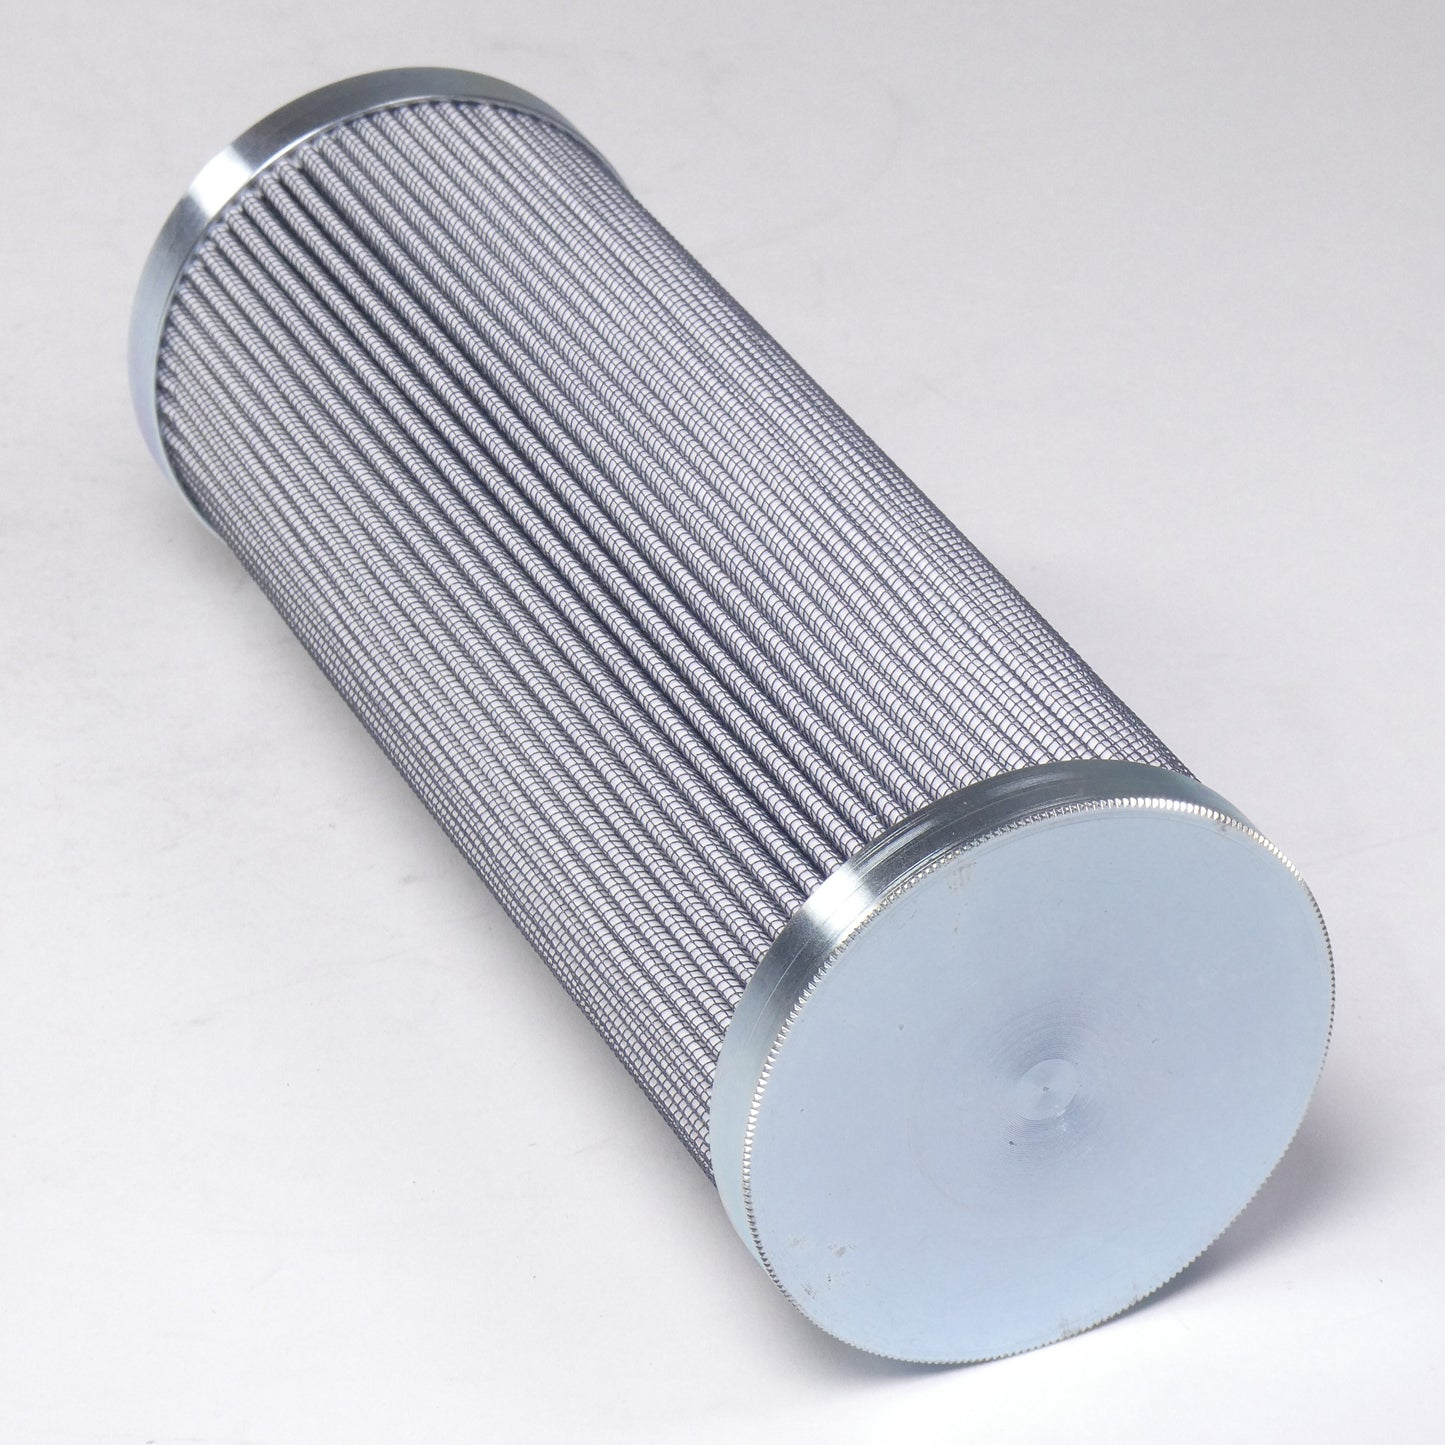 Hydrafil Replacement Filter Element for Pall AC9601FUP8H